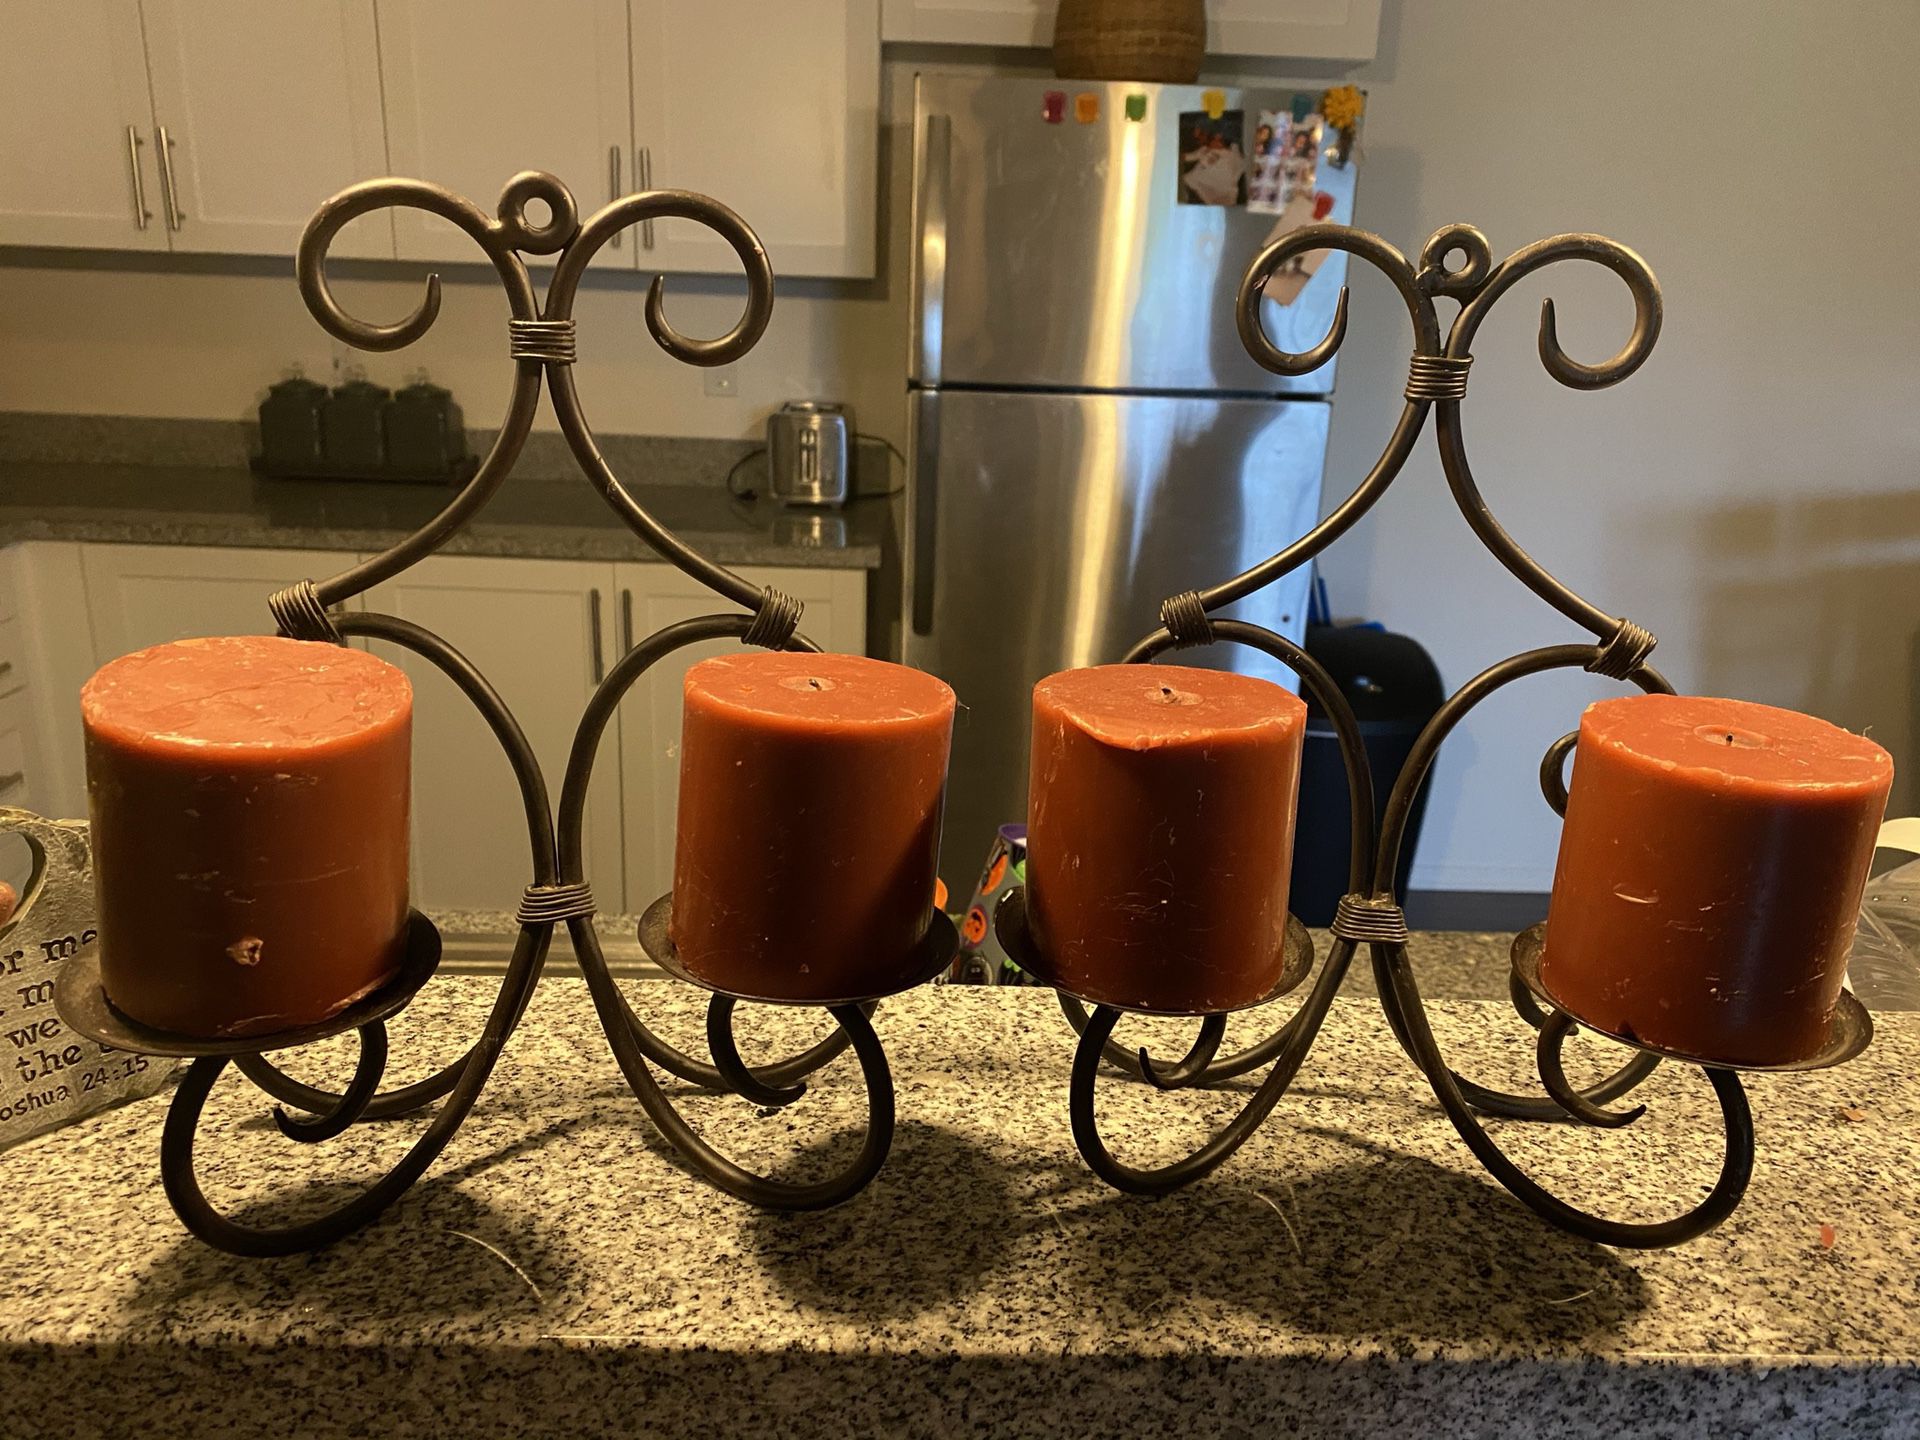 Set of Candle Wall Votives